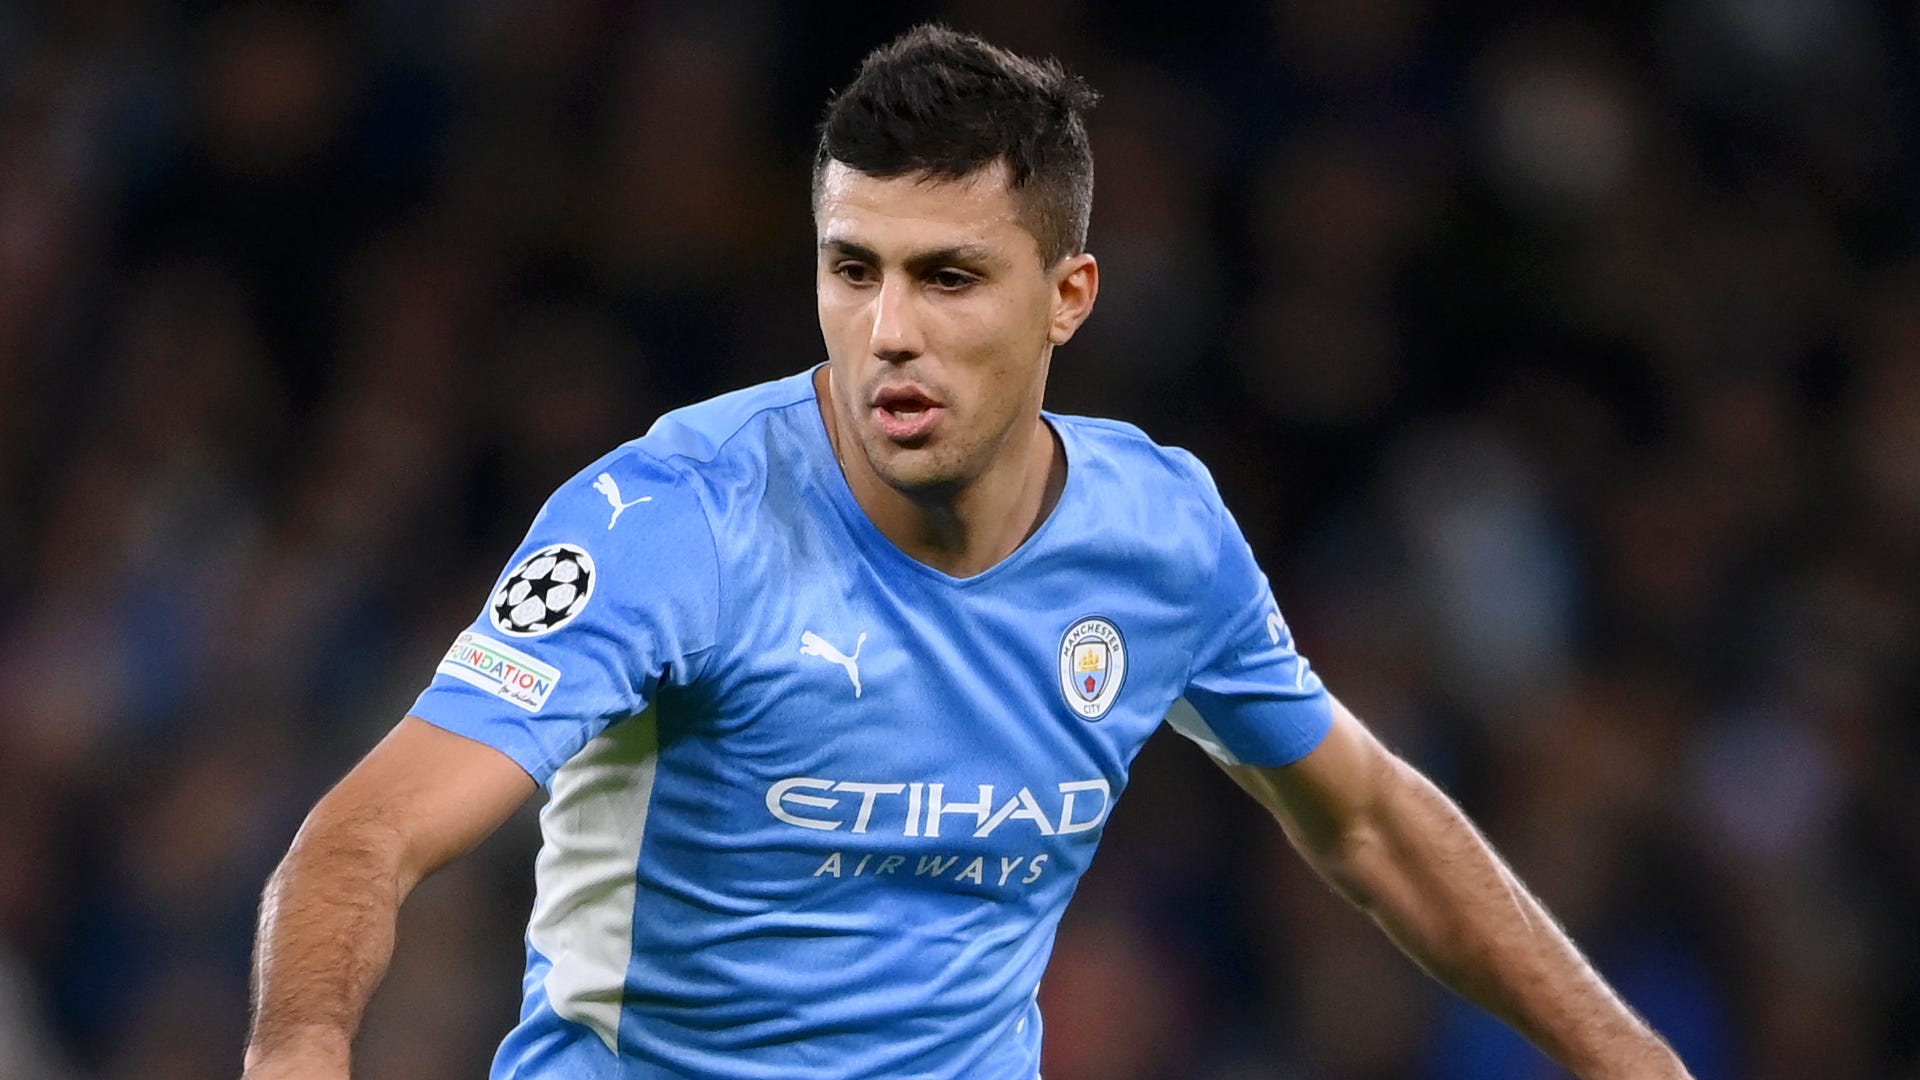 Man City star writes off Arsenal in title race “our real contenders are Liverpool”